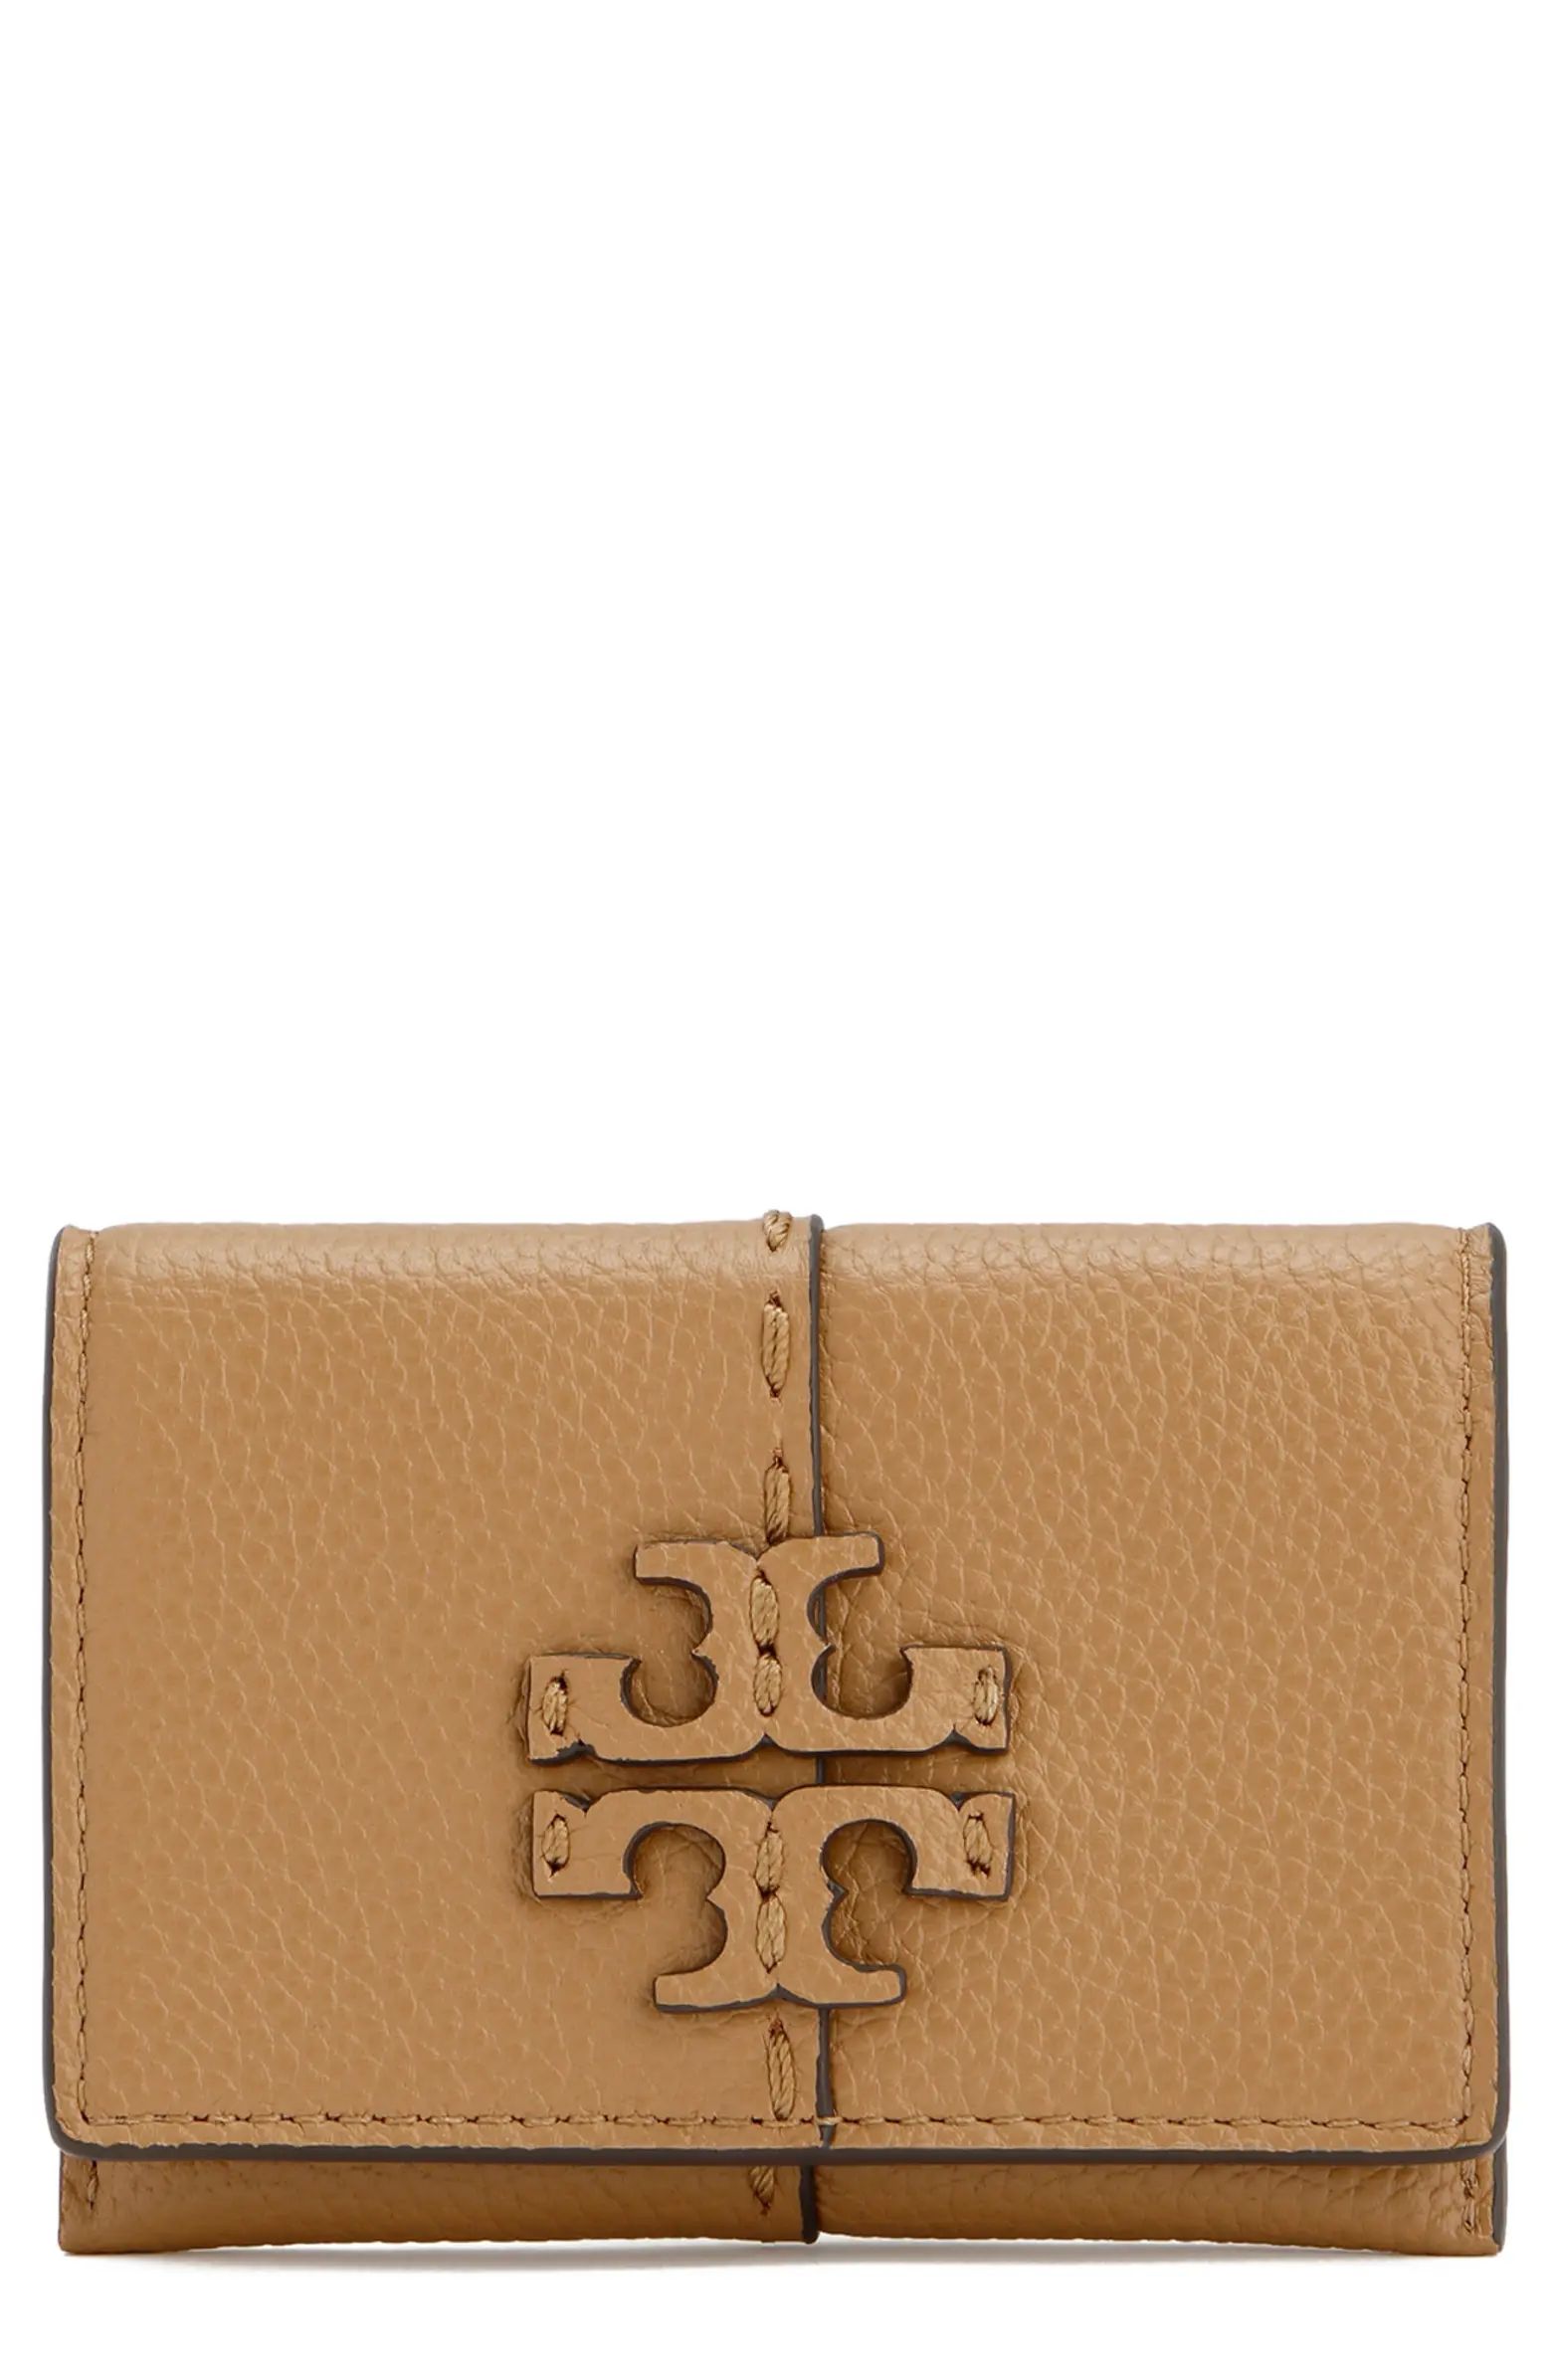 McGraw Leather Flap Card Case | Nordstrom